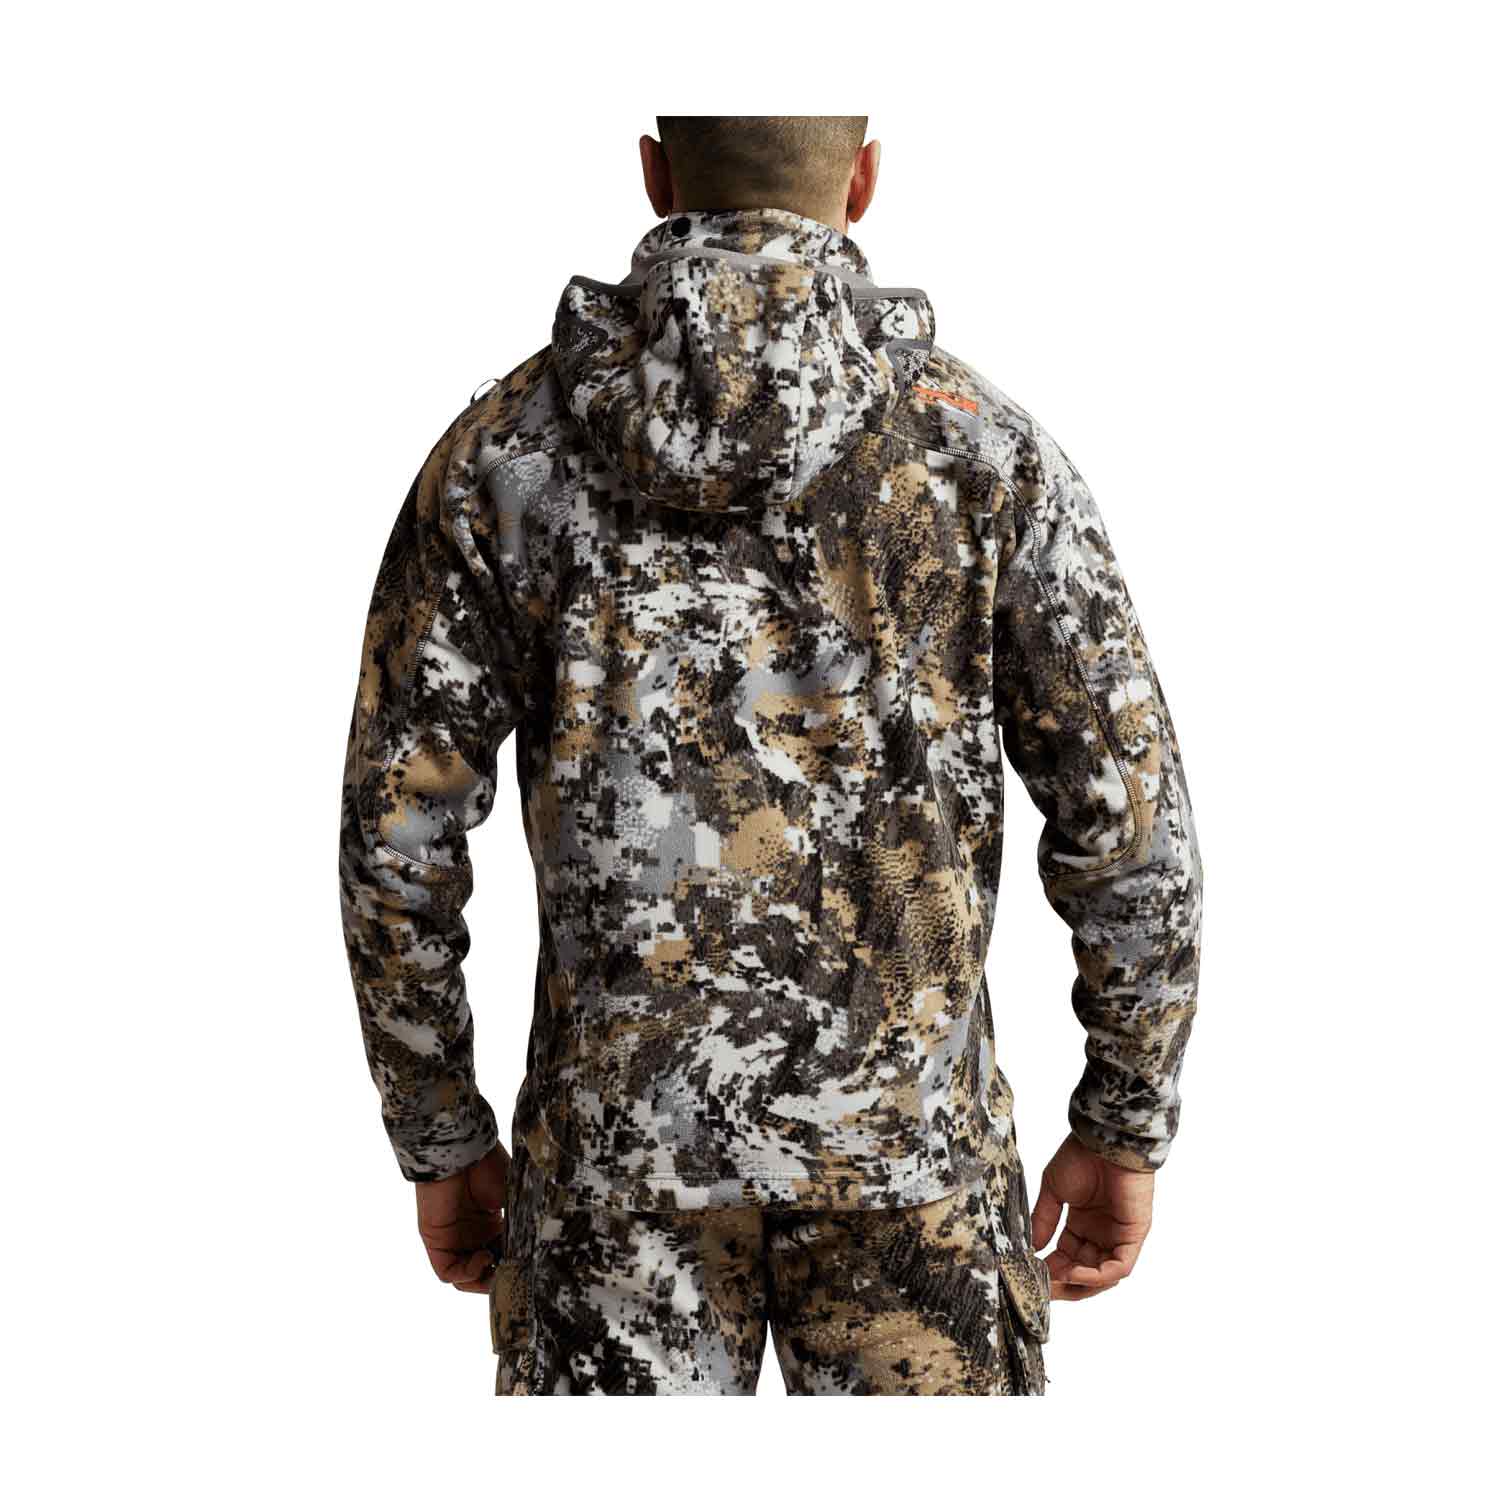 SITKA Gear Stratus Jacket with Constant Connect Harness Port